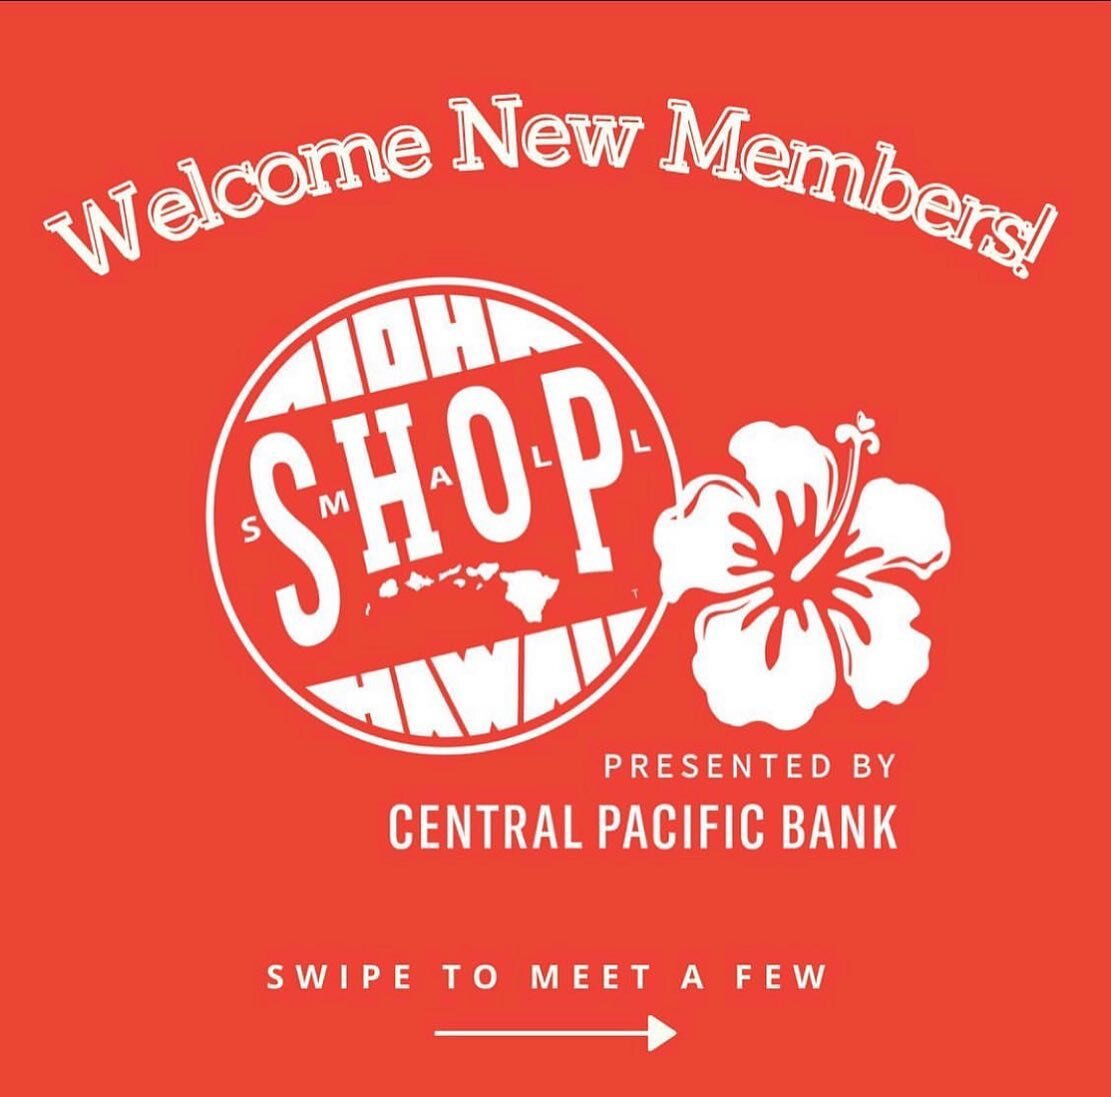 The month of July was full of new business ventures for us at Shop Small Hawaii as we were able to plan and feature some amazing businesses! 🤗

In this month of August, we have been able to bring in a brand new 23 businesses to be a part of our Shop